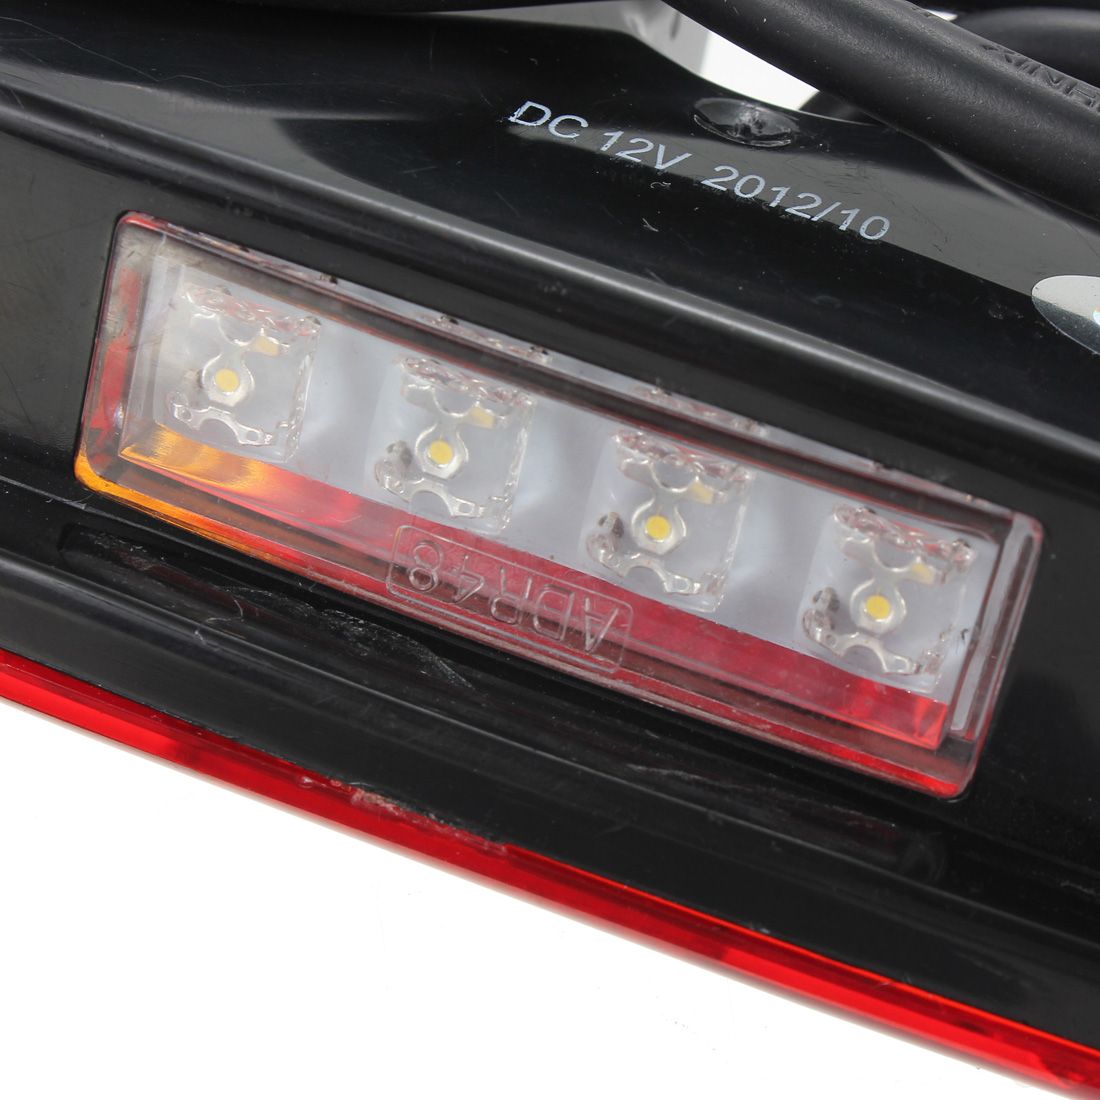 LED-Rear-Tail-Lights-Turn-Signal-Lamps-Waterproof-12V-2PCS-for-Boat-Trailer-UTE-Camper-Truck-55432